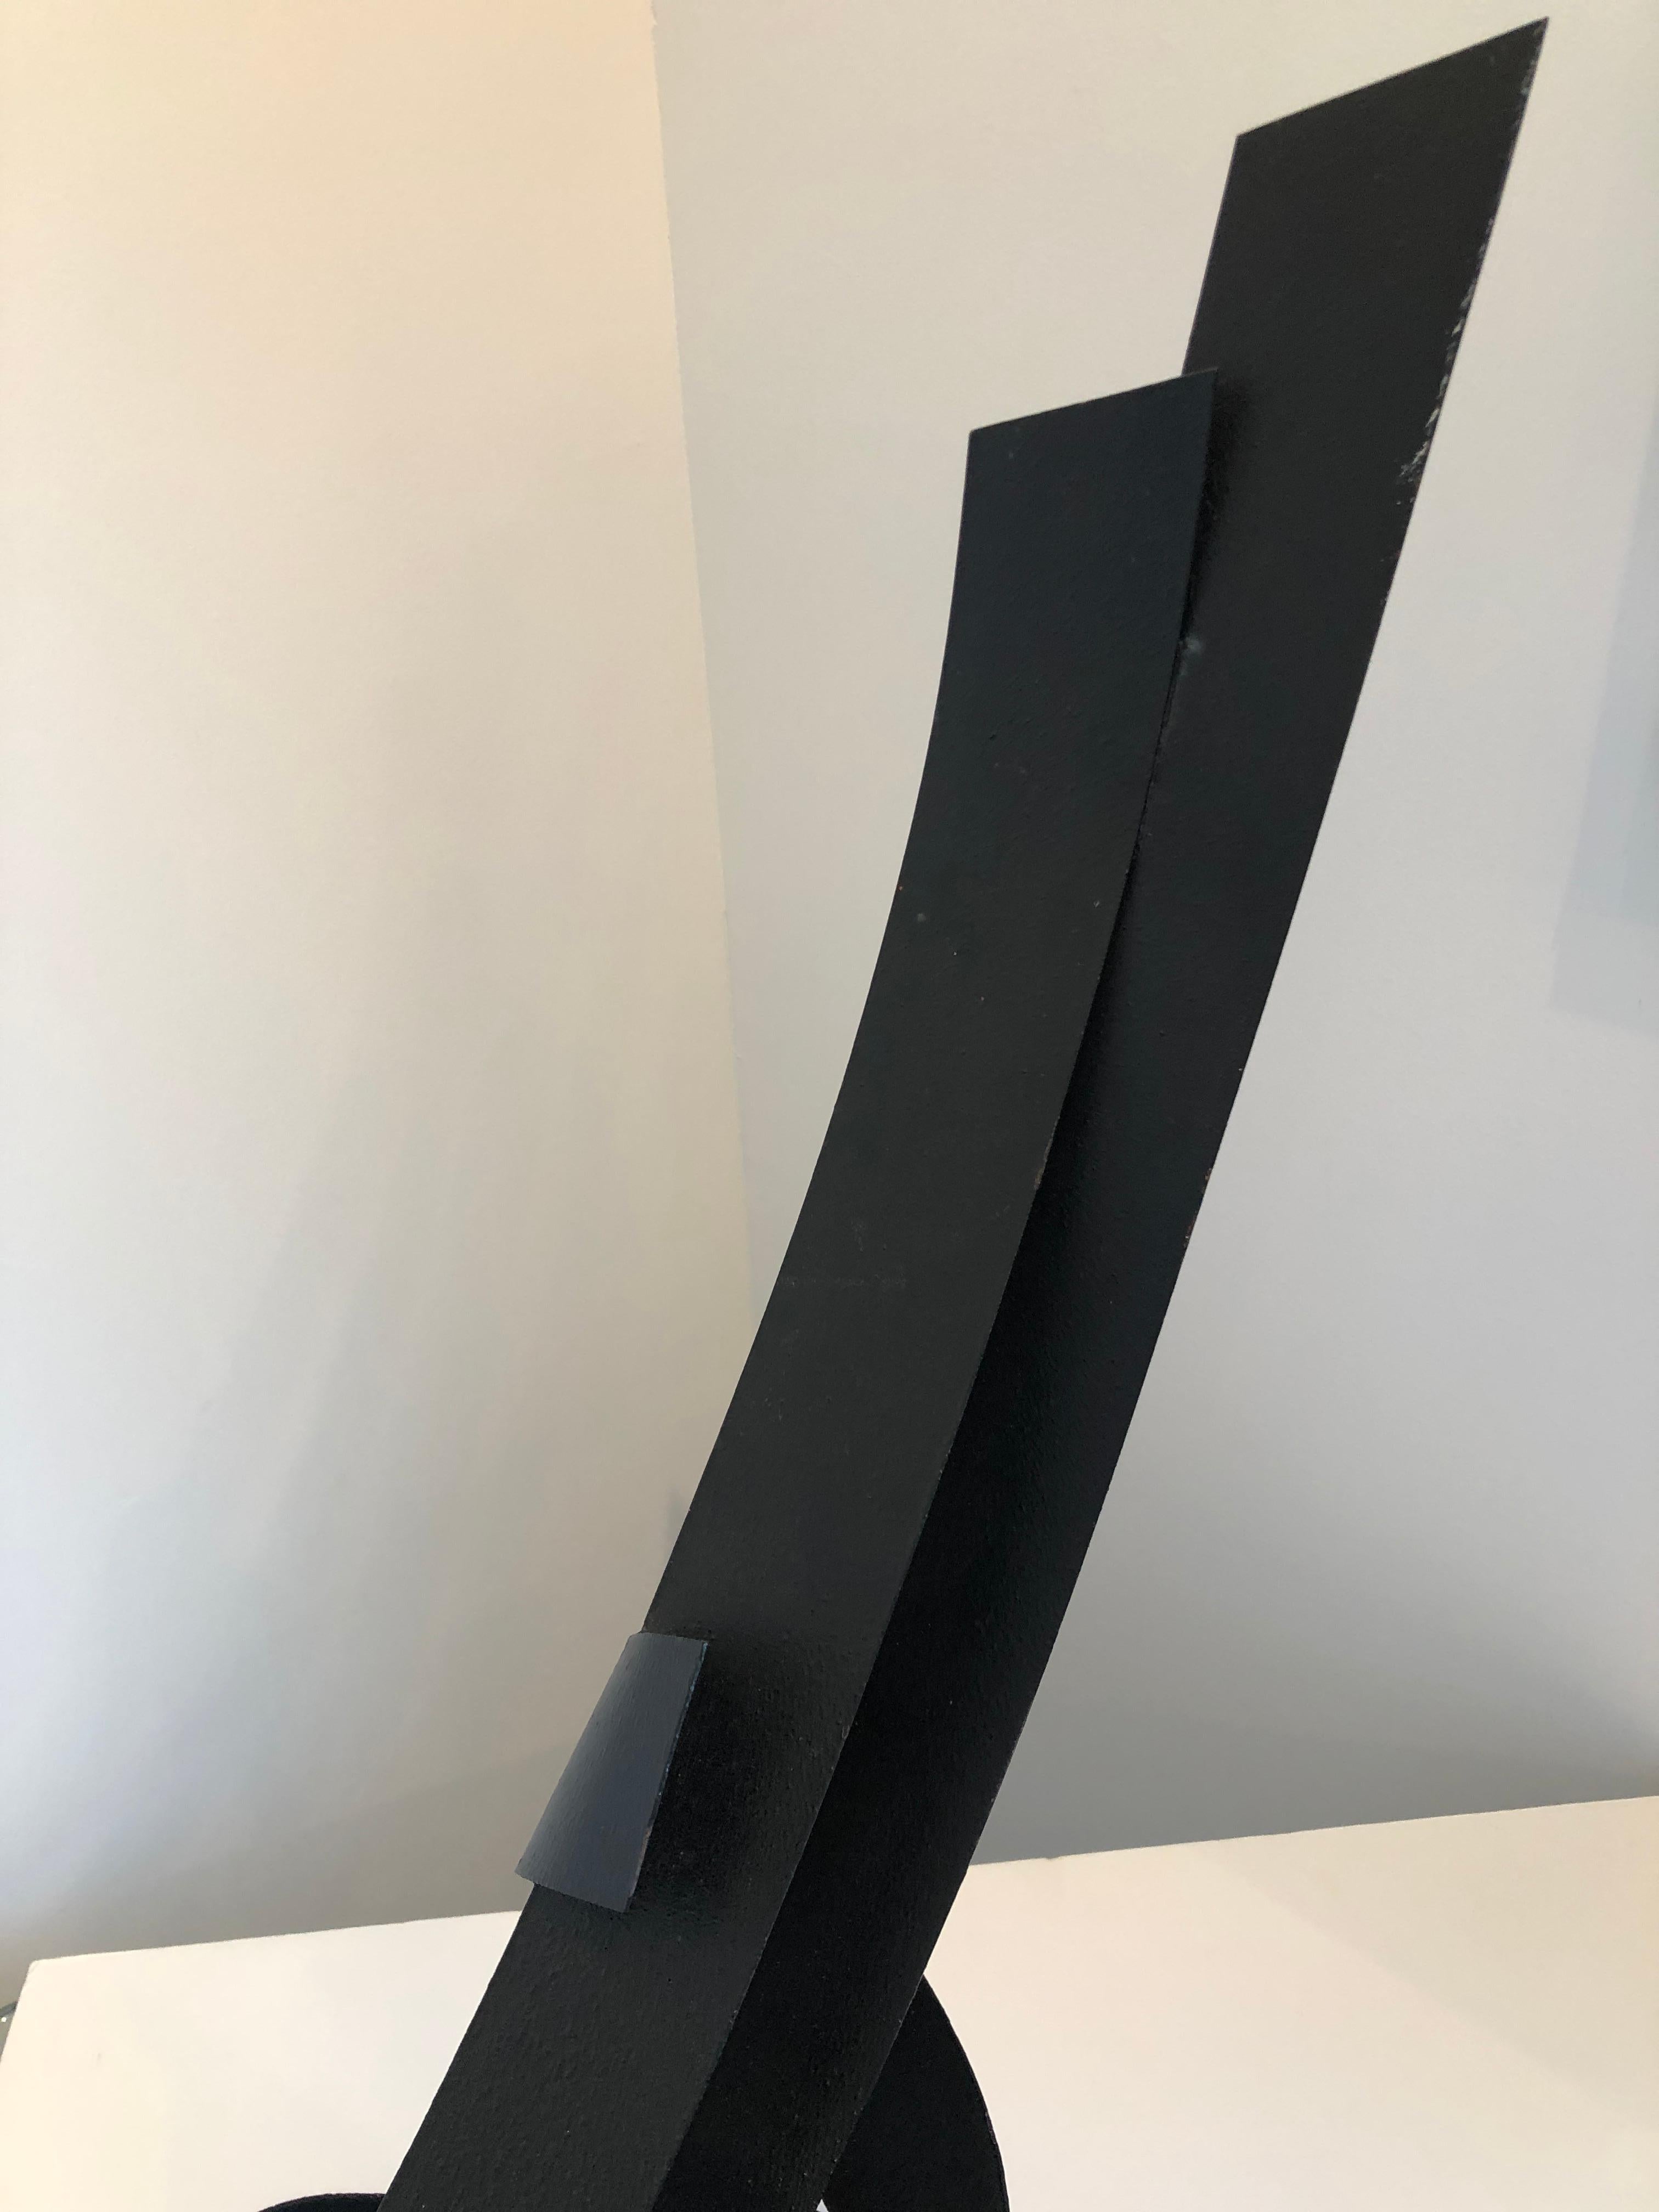 20th Century Abstract Sculpture in Black Textured Iron Metal by John Roper 1